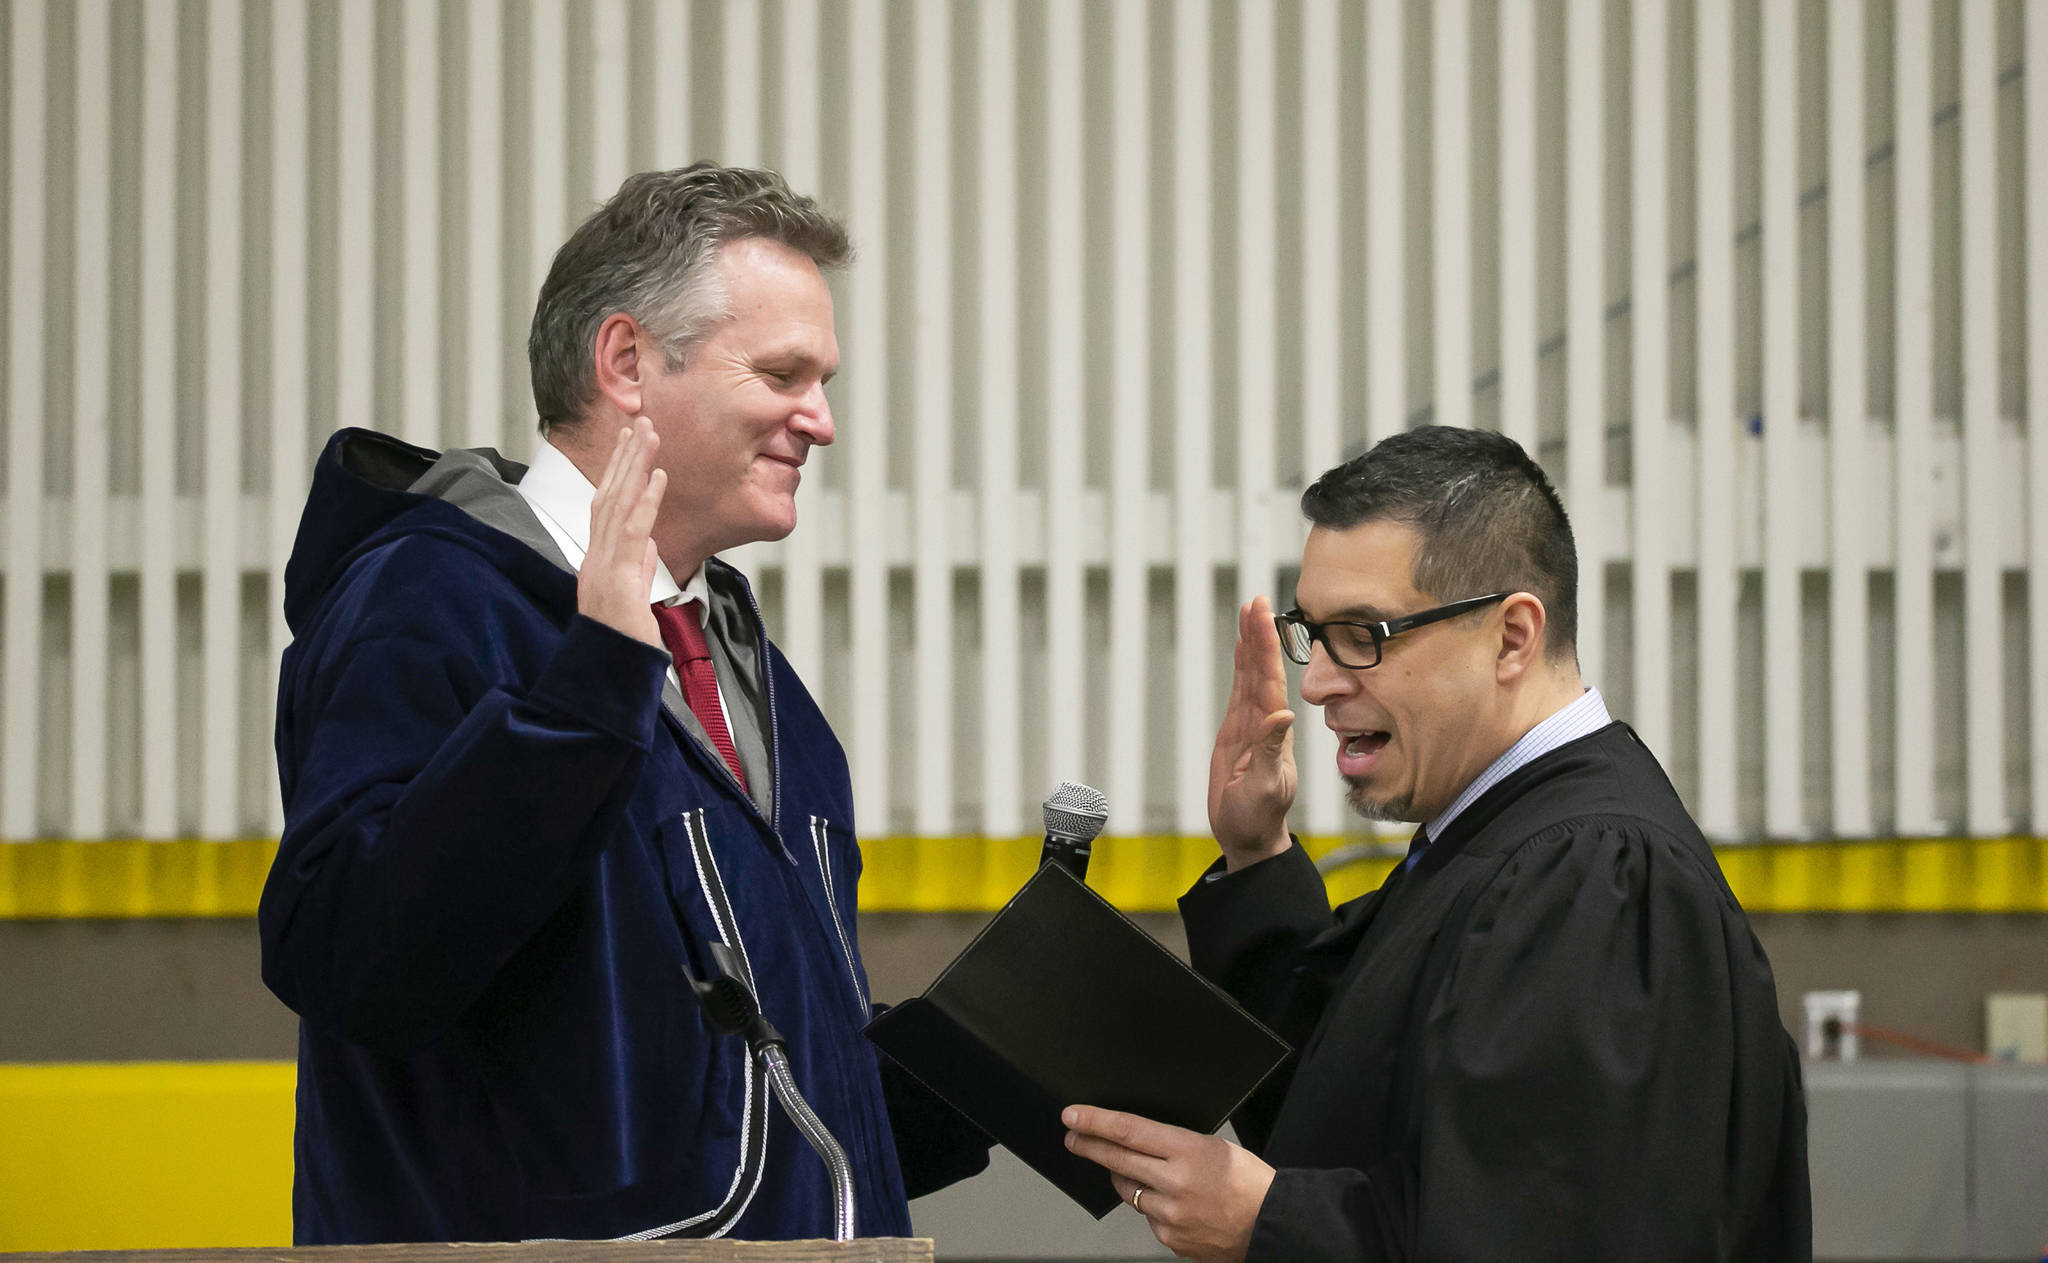 Mike Dunleavy, left, is sworn into office as Alaska’s governor by Superior Court Judge Paul Roetman in Kotzebue, Alaska, on Monday. Poor visibility forced Dunleavey’s swearing-in ceremony to be held in Kotzebue instead of Noorvik, Alaska, his wife’s hometown. (Stanley Wright/Alaska Governor’s Office via AP)